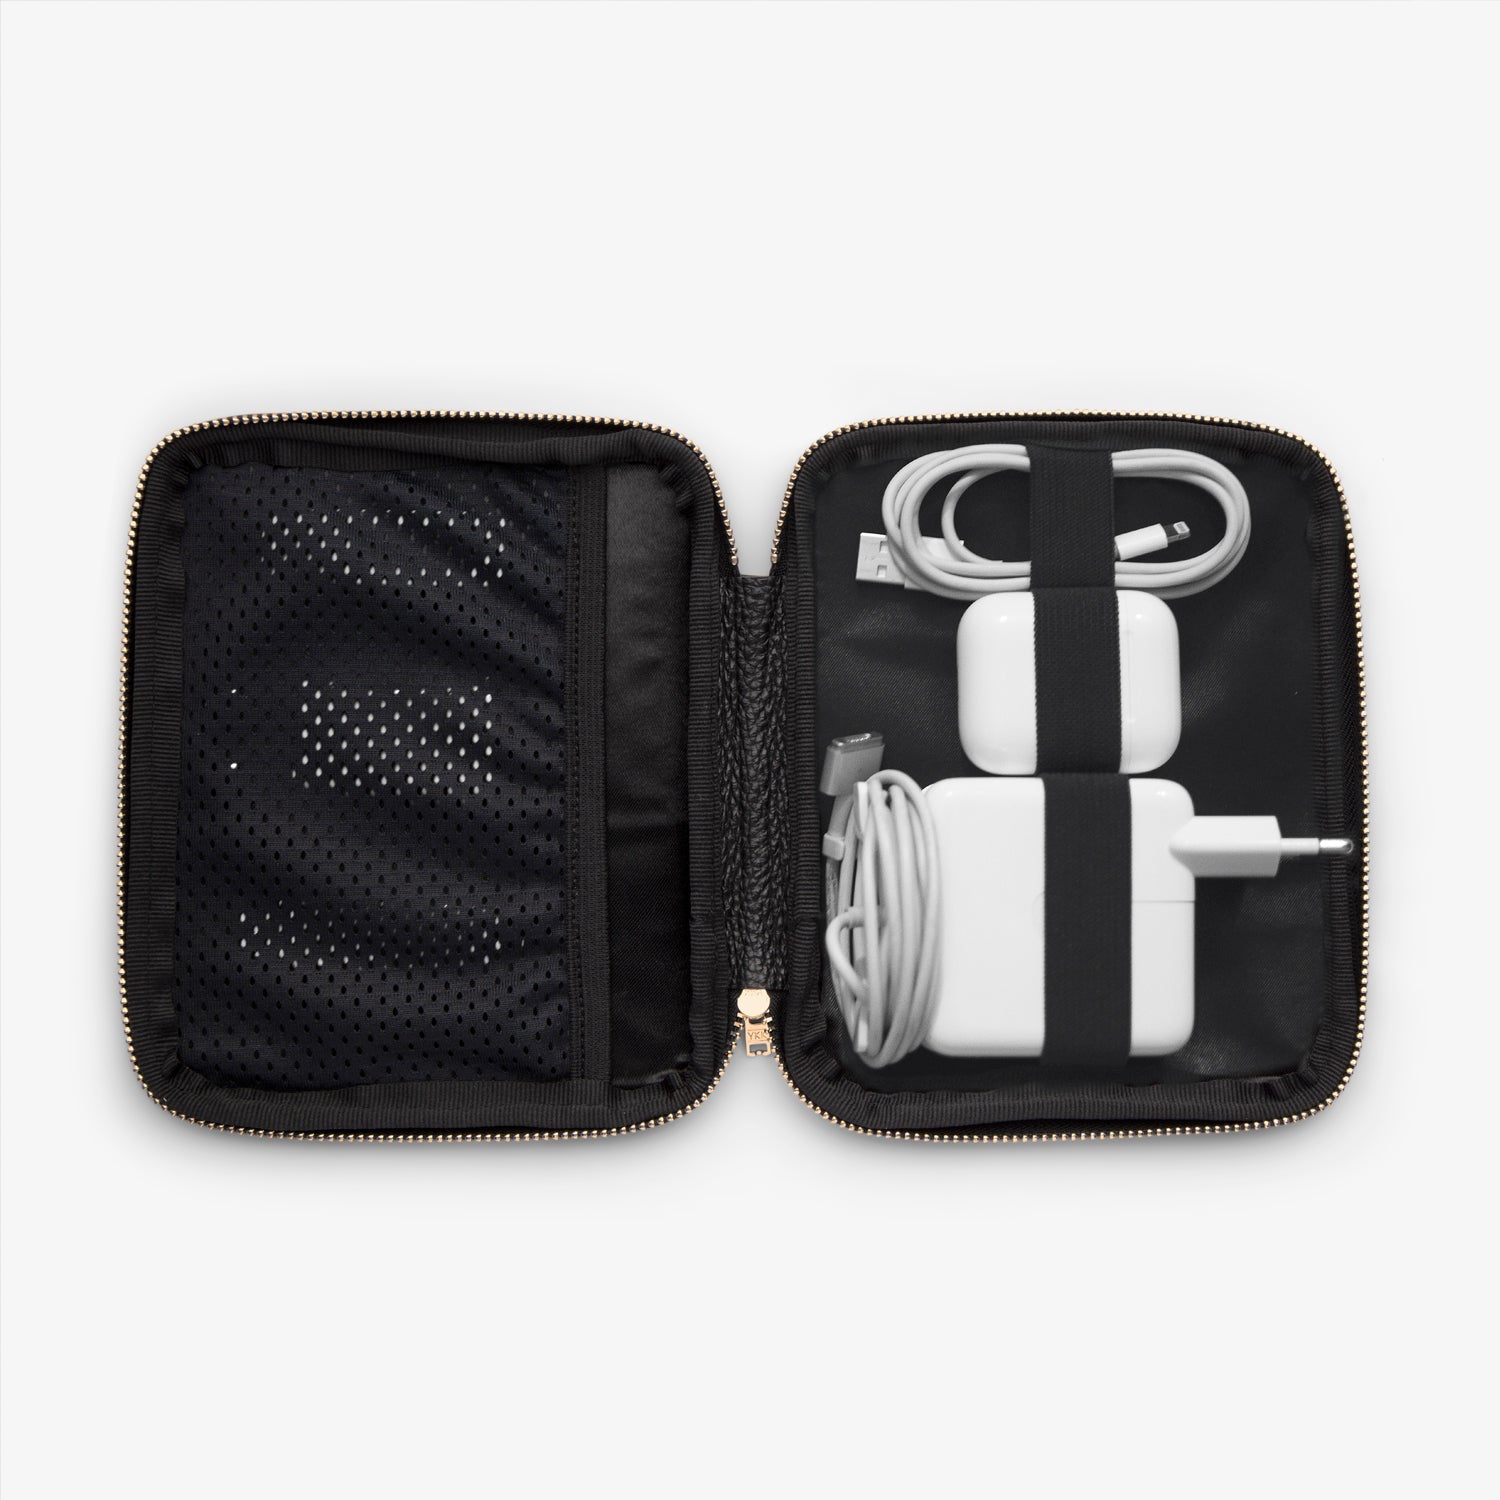 Shows the inside of a cable pocket displaying a computer charger, AirPods, phone charger, and USB stick, all neatly arranged and organized for easy access while on the go.